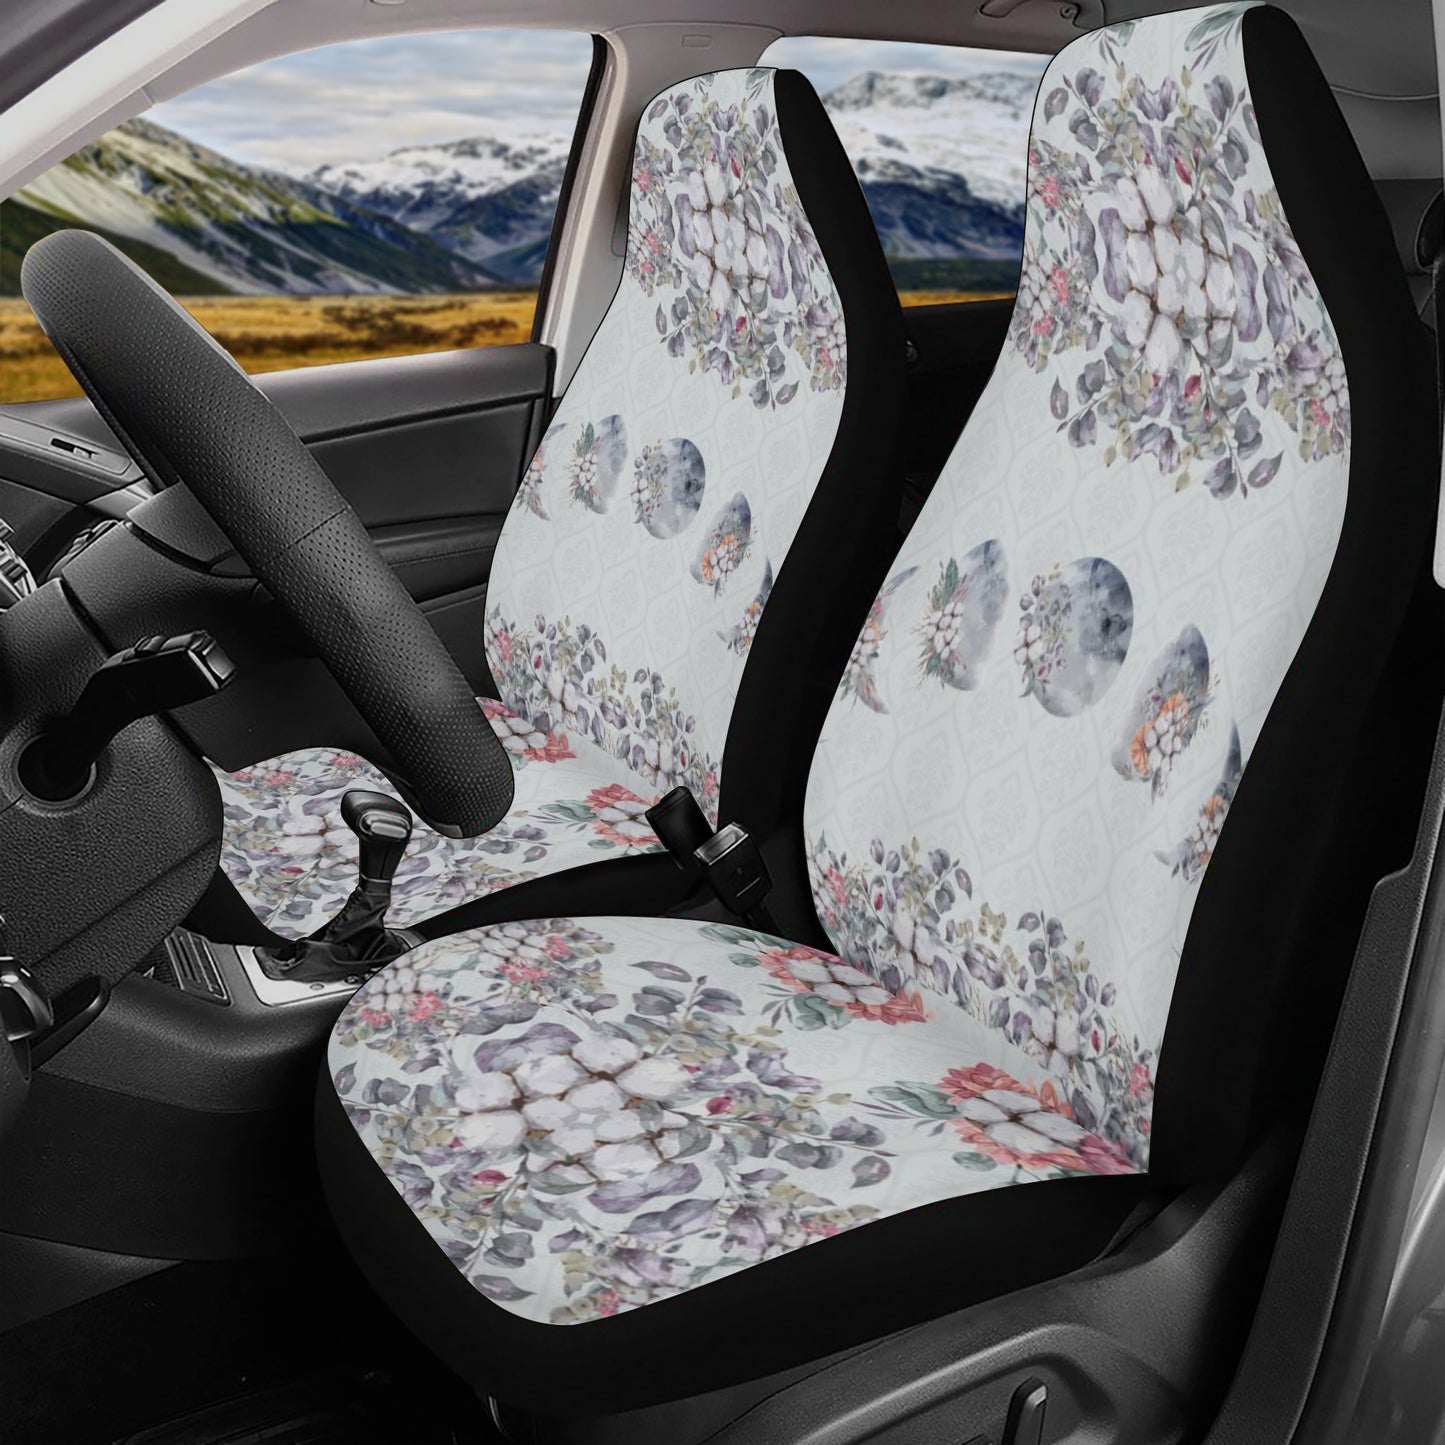 Cotton Floral Moon Phase Car Seat Cover Set